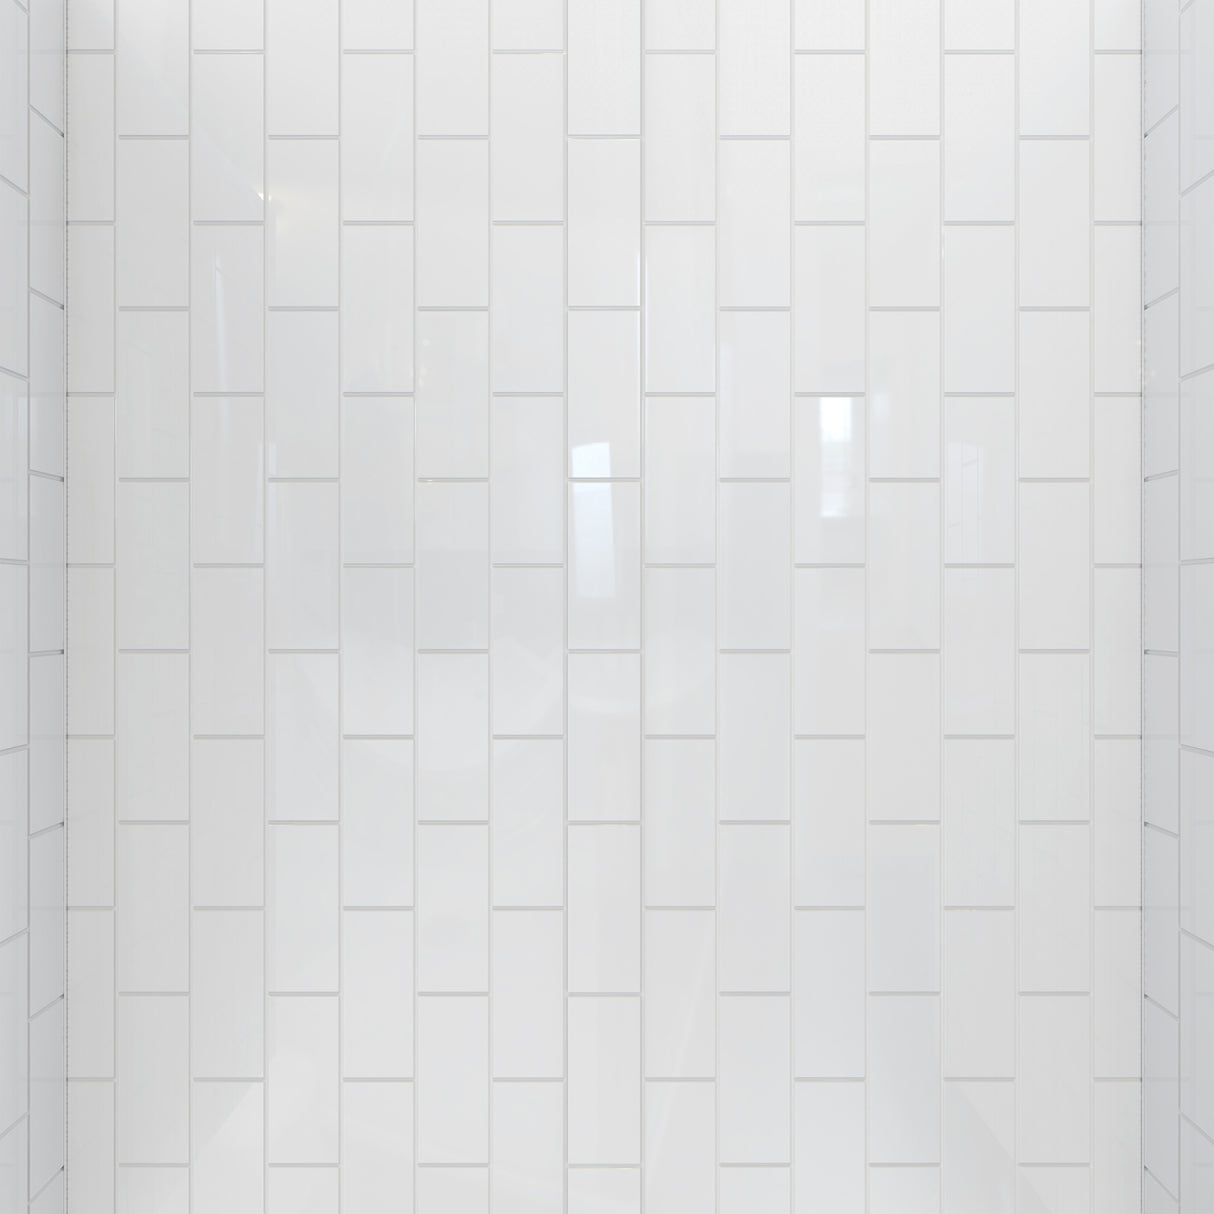 DreamLine Prime 36 in. x 36 in. x 78 3/4 in. H Shower Enclosure, Base, and White Wall Kit in Brushed Nickel and Frosted Glass